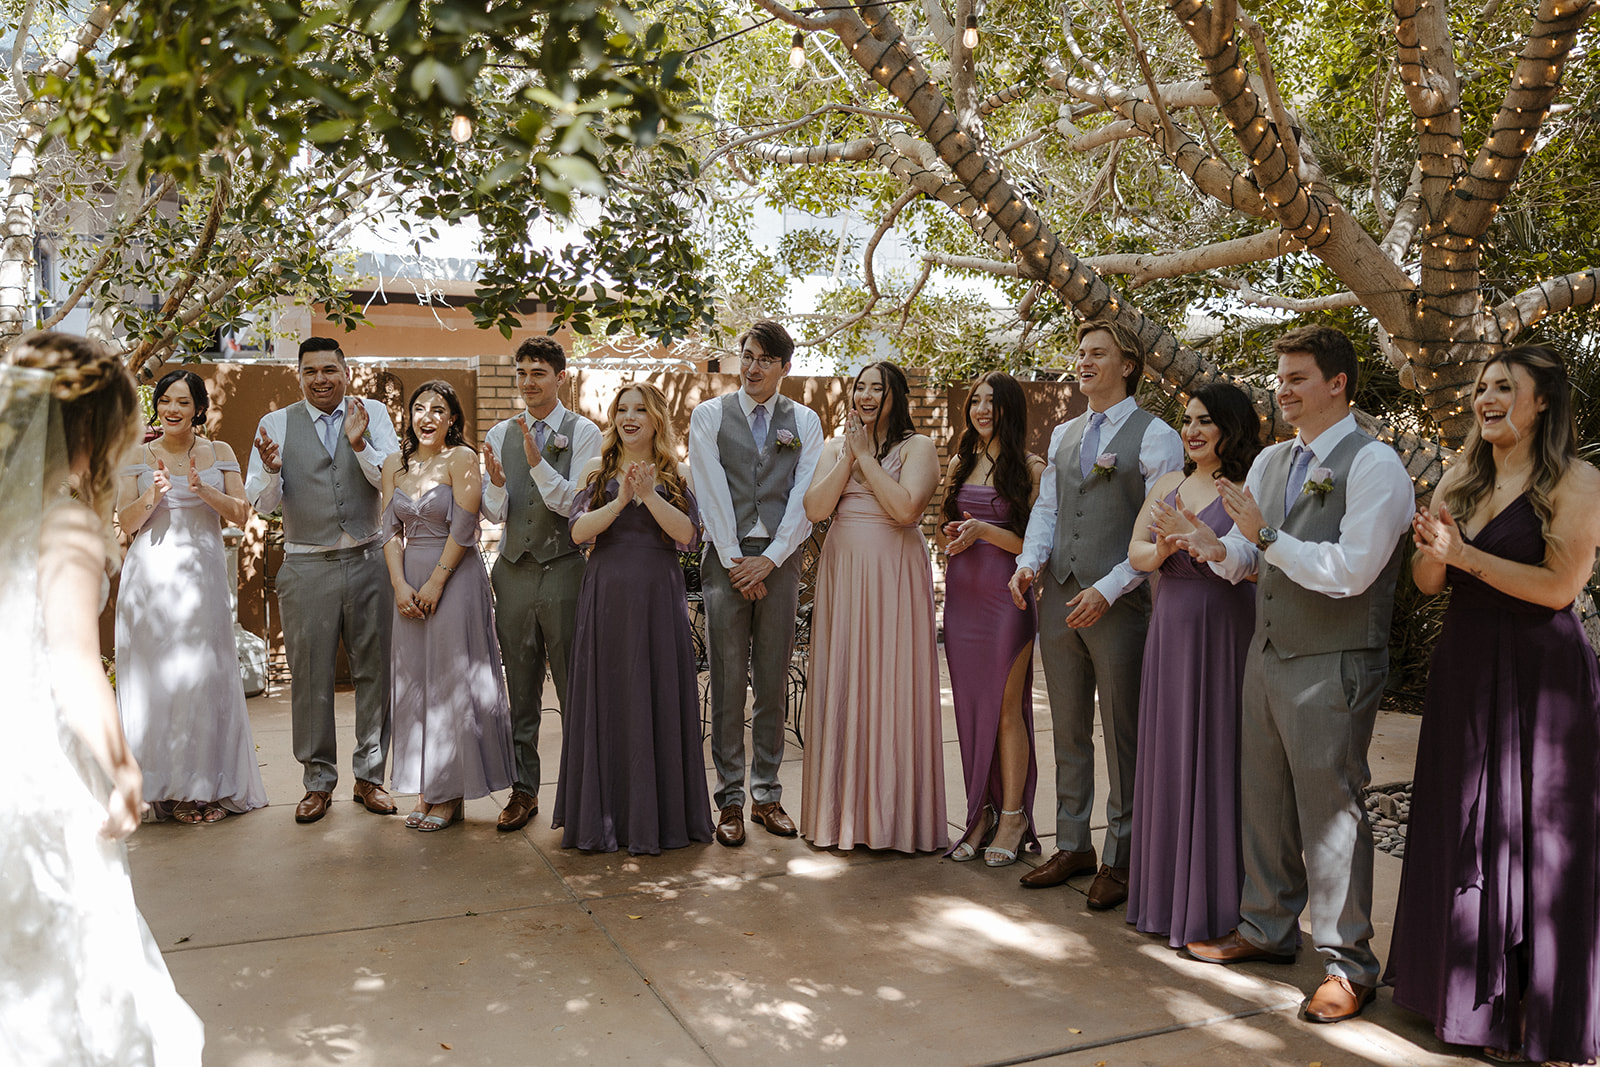 Guests celebrate the bride and groom on their stunning Arizona wedding day!